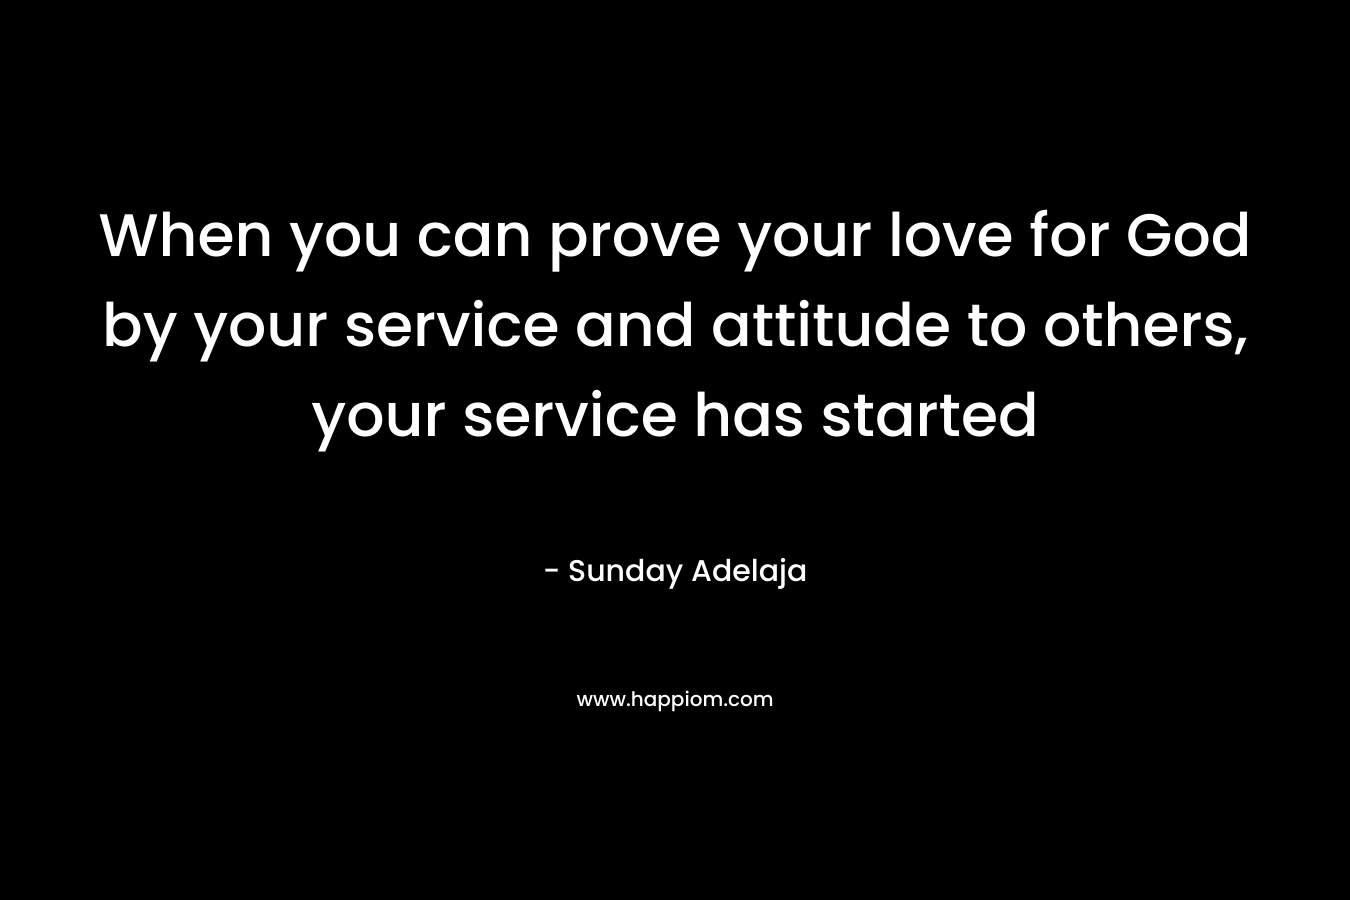 When you can prove your love for God by your service and attitude to others, your service has started